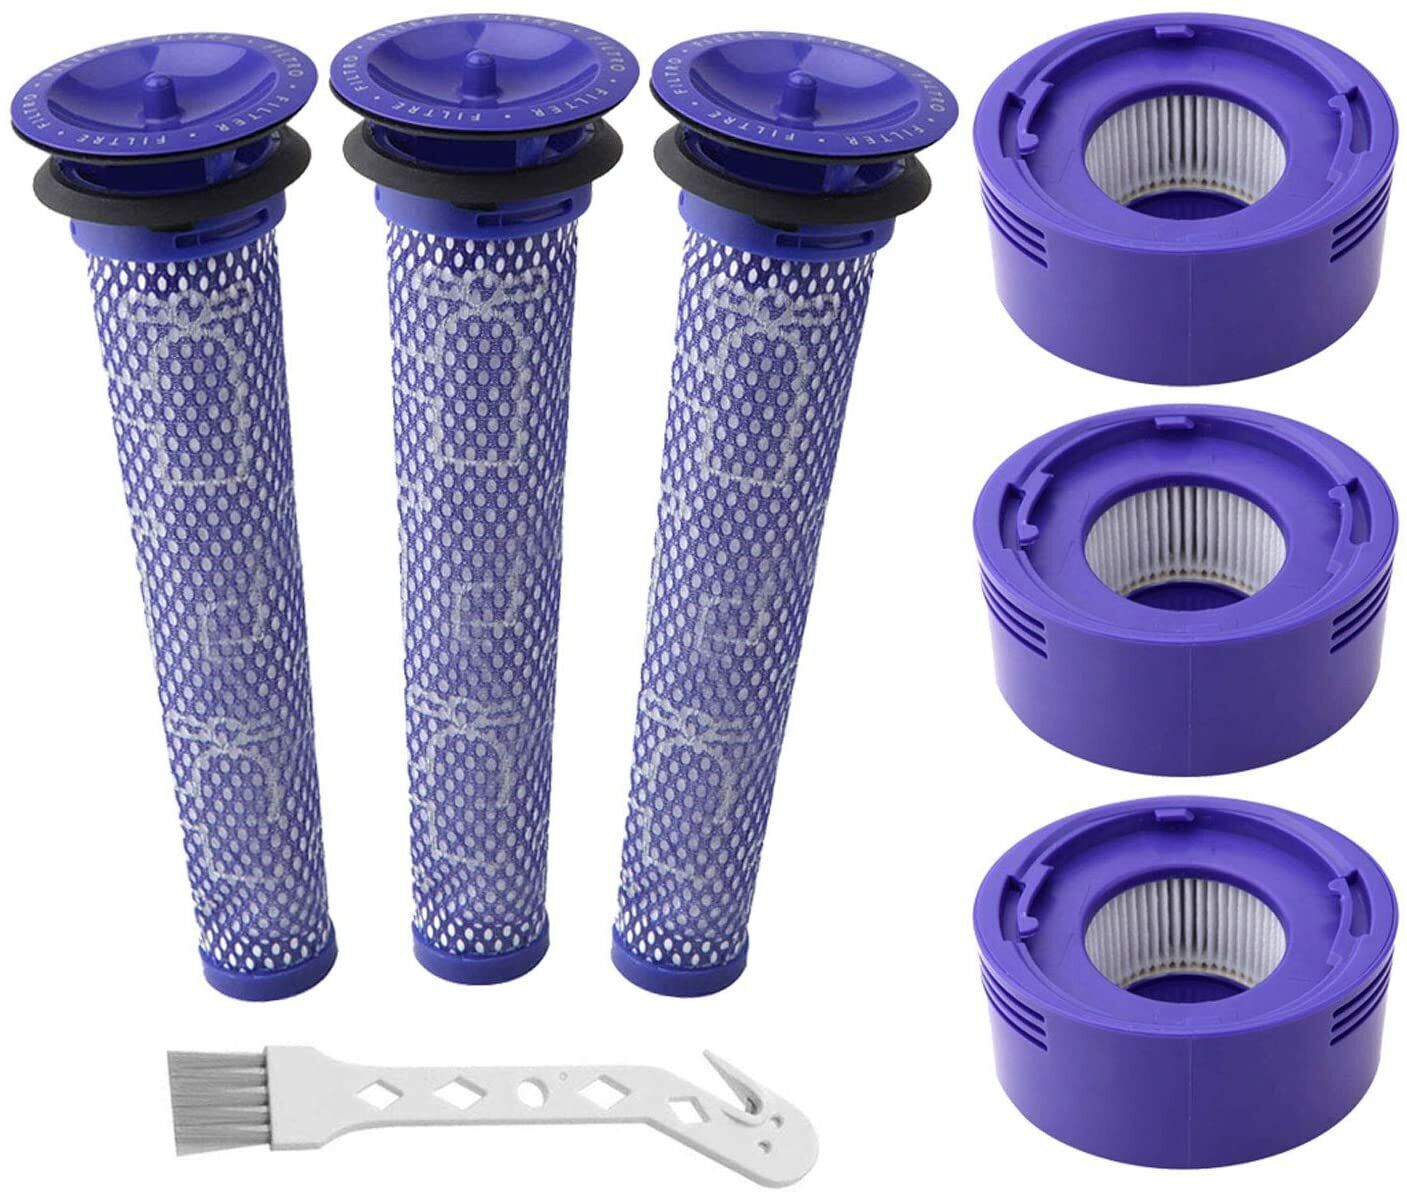 6 Pack Filter Replacement for Dyson V7 V8 Animal and V8 Absolute Cordless Vacuum Housmile